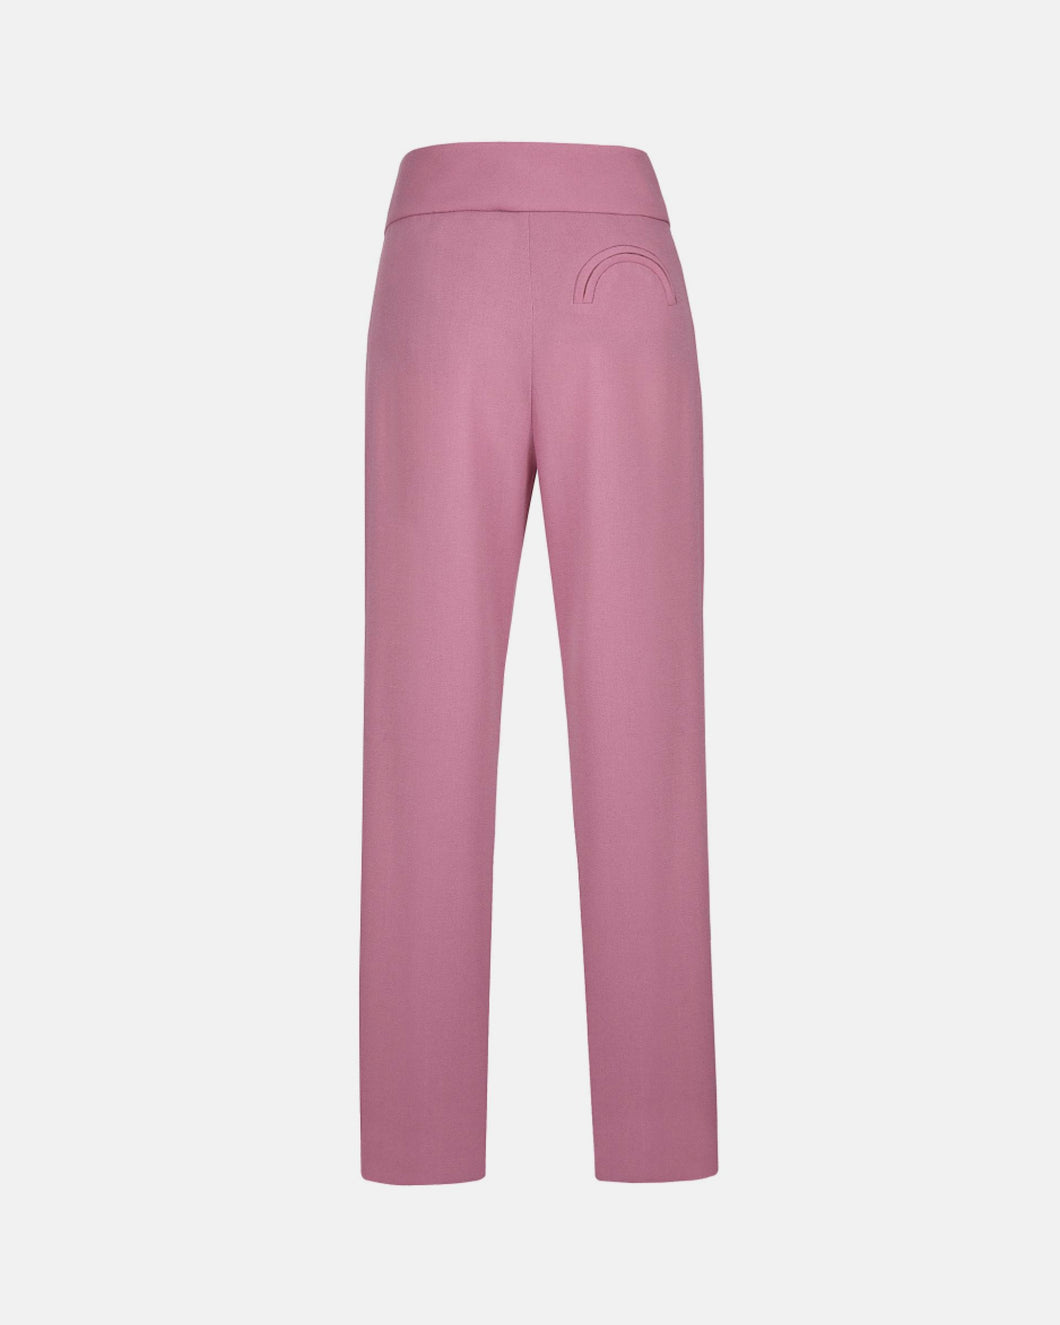 COOL & EASY ORCHID BASQUE PANTS